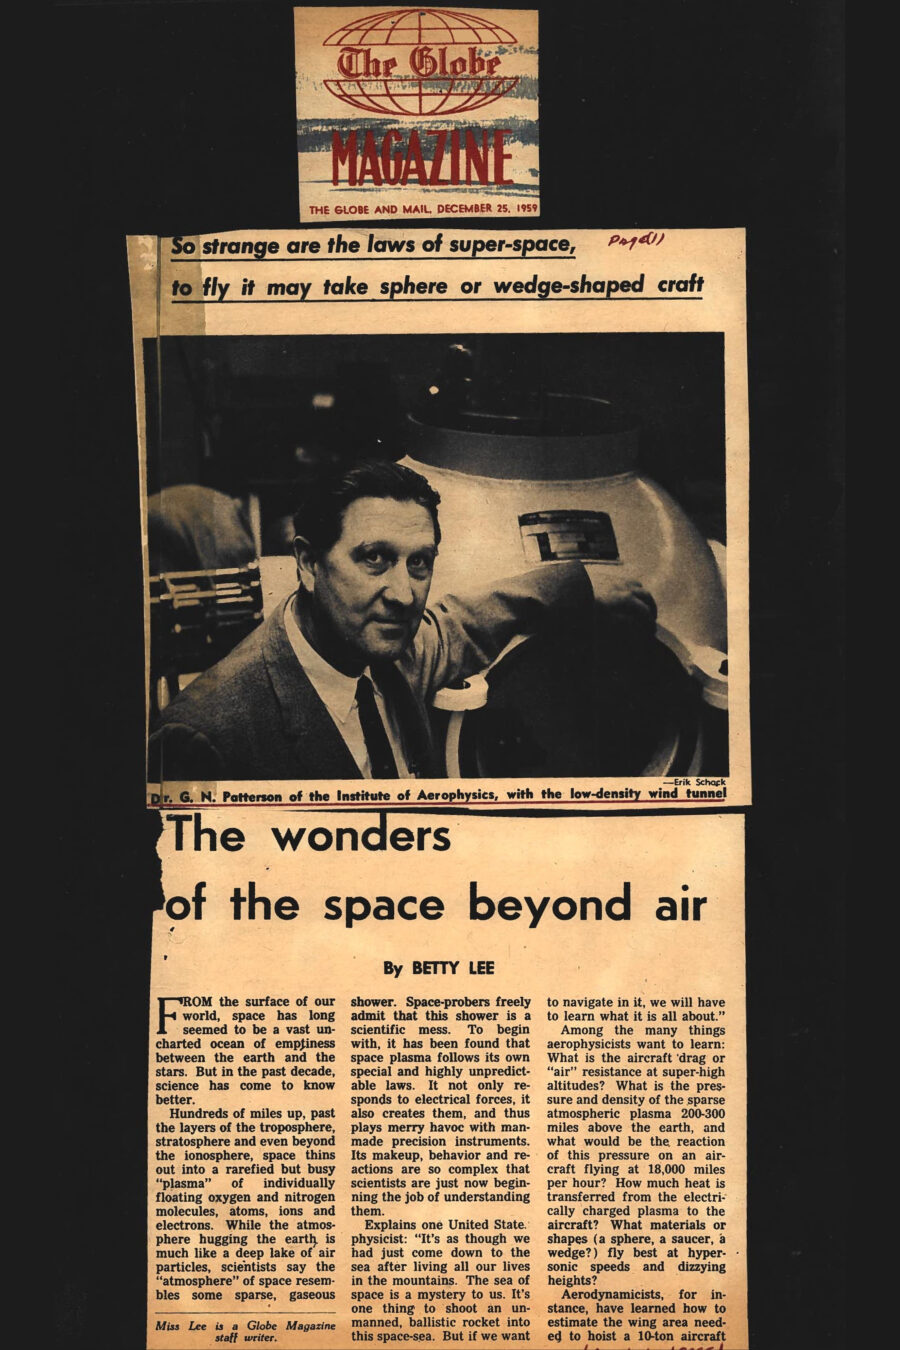 Magazine clipping from The Globe Magazine, The Globe and Mail, December 25, 1959
Headline: The wonders of the space beyond air
Byline: Betty Lee
Photo 1: Dr. Patterson wearing a suit and tie stands before a large piece of lab equipment.
Caption: Dr. G.N. Patterson of the Institute of Aerophysics, with the low-density wind tunnel.
Photo 2: A model in an experiment, the angular curve of air shock waves flowing from its front.
Caption: Air shock waves are being measured against a model device.
Photo 3: A zebra-skin-like pattern of rounded black and white stripes splay against the hard edge of a block.
Caption: The flow of shock waves around a 90-degree wedge.
Photo 4: Two men stand before a large wind tunnel, its hatch open at one end.
Caption: Dr. Patterson and Stuart Gordon, a research assistant working toward his doctorate, with the 20-foot tunnel.
From the surface of our world, space has long seemed to be a vast uncharted ocean of emptiness between the earth and the stars. But in the past decade, science has come to know better. Hundreds of miles up, past the layers of the troposphere, stratosphere and even beyond the ionosphere, space thins out into a rarefied but busy “plasma” of individually floating oxygen and nitrogen molecules, atoms, ions and electrons. While the atmosphere hugging the earth is much like a deep lake of air particles, scientists say the “atmosphere” of space resembles some sparse, gaseous shower. Space-probers freely admit that this shower is a scientific mess. To begin with, it has been found that space plasma follows its own special and highly unpredictable laws. It no only responds to electrical forces, it also creates them, and thus plays merry havoc with man-made precision instruments. Its makeup, behavior and reactions are so complex that scientists are just now beginning the job of understanding them.
Explains one United States physicist: “It’s as though we had just come down to the sea after living all our lives in the mountains. The sea of space is a mystery to us. It’s on thing to shoot an unmanned, ballistic rocket into this space-sea. But if we want to navigate in it, we will have to learn what it is all about.” Amon the many things aerophysicists want to learn: What is the aircraft drag or “air” resistance at super-high altitudes? What is the pressure and density of the sparse atmospheric plasma 200-300 miles above the earth, and what would be the reaction of this pressure on an aircraft flying at 18,000 miles per hour? How much heat is transferred from the electrically charge plasma to the aircraft? What materials or shapes (a sphere, a saucer, a wedge?) fly best at hypersonic speeds and dizzying heights?
Aerodynamicists, for instance, have learned how to estimate the wing area needed to hoist a 10-ton aircraft into the molecule-rich atmosphere close to the earth. But how much wingspan is needed to lift a similar plane through the thin regions of space? And how would this “thinness” react on the structure and wing area of a manoeuvrable space aircraft? Scientists around the globe have been nibbling at these questions for several years. Experimental aircraft, such as the U.S.’s X-15, have helped throw a glimmering of light on some of them. But at the moment, only two major scientific laboratories in the western world are working full-time at the staggering job of finding answers. One, in the physics department of the University of California, is studying the problem of heat transference at super-high altitudes. The other, the Institute of Aerophysics at the University of Toronto, has been busy since 1955 (through Defense Research Board grants and U.S. Air Force and Navy contracts) researching and building the original equipment to snoop into the mysteries of space density, the structure of space plasma and its reaction on powered aircraft, and the behavior of shock waves at the fringes of the atmosphere.
Progress so far? “Slow,” admits the Institute’s director, Dr. G.N. Patterson. It took almost five years, for instance, to conceive and construct the sophisticated equipment needed to start probing the problems. If visitors ask how long it wil take for any clearly defined answers to emerge from upcoming research, Institute staffers are inclined to change the subject. Says Dr. Patterson cautiously: “It’s going to be a long job.” Experiments in space density, alone, are likely to absorb much of the Institute’s time and money for the next few years. The basic problem being tackled in this special area: How will a high-speed, man-powered aircraft react (drag, air-flow, pressure, etc.) in low-density conditions far above the earth? The key to the problem: An understanding of the structure of “air” at high altitudes and its recreation in the lab for research purposes. 
The Institute of Aerophysics began researching this problem by building the only known low-density wind tunnel of any size in the world today. Outwardly, the tunnel looks very much like an over-sized hot-water boiler, awesomely equipped with a bristle of clocks, gauges and controls. Institute workers will tell you the 20-foot, beige-painted monster is as deceptive as an iceberg. Vacuum pumps, which are the actual power-guts of the machine, have been embedded for quietness and efficiency in underground pits beneath the Institute’s husky new concrete building on North Dufferin Street, Toronto. Once the pumps are working, the tunnel screams into life. A mixture of oxygen and nitrogen gas (of which earth’s atmosphere is comprised), is forced through a controlled inlet at one end of the tunnel. At the other end, the underground pumps proceed to suck it out again. The degree of forcing versus sucking determines the “air molecule density” (or the Knudsen number, as Dr. Patterson calls it) of the air inside the machine.
By thinning out the oxygen and nitrogen molecules to any given density or Knudsen number, the UTIA can therefore create an atmosphere inside the tunnel which parallels conditions hundreds of miles above the earth. Controlled winds inside the machine can bring the theoretical speed of any model placed inside the test are to upward of 18,000 miles a hour. By pulling back or increasing the speed, increasing or decreasing the air density, the model can be “flown” up into space and brought down to earth again.
Effects of pressure, air-slip and drag on the model are noted in various ways. The Institute has successfully tried “lighting up” the thin air inside the tunnel with electrical charges, then watching how it reacts around the surface of a model navigating through space. High-speed photography is being used extensively to compare experiments with different model shapes and materials. One fascinating branch of the low-density wind tunnel experiments: A UTIA attempt to approximate powered flight through the outer and inner atmospheres of other planets. Says Dr. Patterson: “We can shoot any type of air molecules into the thing.” By injecting the known components of Mars-atmosphere, Venus-atmosphere, Saturn-atmosphere into the tunnel, then controlling density and windspeeds, the Institute has begun to see how a space aircraft might react during powered excursions through the solar system.
To study the air components themselves and to watch how gas molecules ionize or “disassociate” into an electrically charged space plasma at high altitudes (caused by radiation from the sun), the Institute has built its own low-density plasma tunnel. Space plasma is created in this machine by heating thin-molecule air to 27,000 degrees Fahrenheit, or approximately twice the temperature satellites might encounter in space. The problem: what laws control this plasma, and how will these laws affect the performance of a powered space aircraft? Echoing other physicists who are grappling with questions about the perplexing “space-sea”, UTIA’s Patterson admits the problem is staggering. “But breathtaking,” he adds. To begin with, the study of space plasma and how man fly through it, is only one small aspect of a gigantic, recently discovered scientific question mark. “By solving the problems of flight in and out of this plasma,” says Dr. Patterson, “we will obviously discover more about its makeup and behavior. And by discovering these facts, science will be close to discovering the basic secrets of energy.”
He explains it this way: The plasma of space is very much like the electrically charged plasma or makeup of the sun. therefore, research into the space-sea is actually research into nature’s own powerhouse. Understanding space and its laws, says Dr. Patterson, will bring science closer to understanding the secrets of controlled nuclear fusion, or the secrets of how the sun manufactures its energy. Man can perhaps accept what this means by realizing there is enough dormant power (heavy hydrogen) in one bucket of water to generate power equivalent to 300 gallons of gasoline. “How to release this power is another matter,” says Dr. Patterson. “The sun knows how to do it. We don’t. More specifically,” he adds, “it is possible to imagine that the energy of space plasma can eventually be used to help man navigate to the stars and back.” How will it be done? By using the power for braking purposes; for boosting the manoeuvrability of an aircraft; and even for powering the aircraft itself. “It probably sounds fantastic at this point,” says Dr. Patterson. “But the really fascinating thing is scientists know it can be done.”